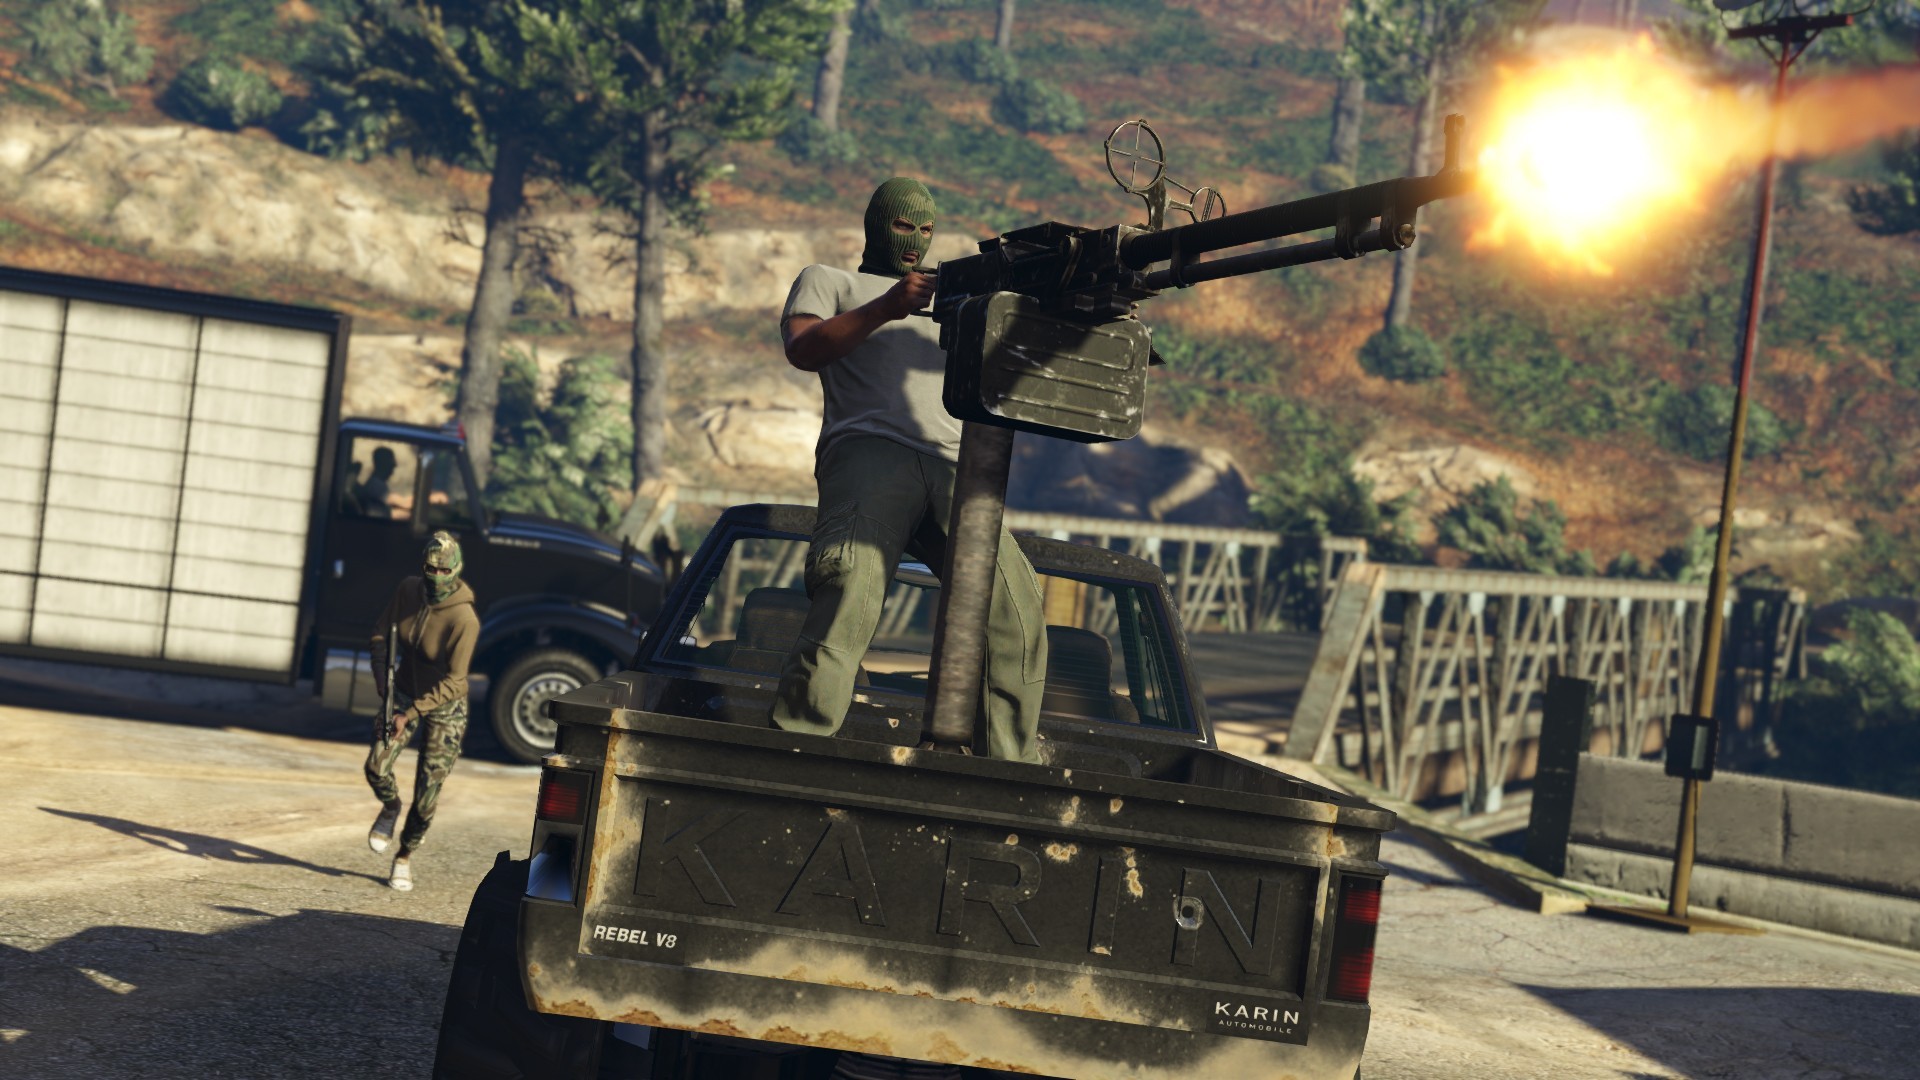 Download Grand Theft Auto 5 High Life Update 1.13 Now on PS3, Xbox 360